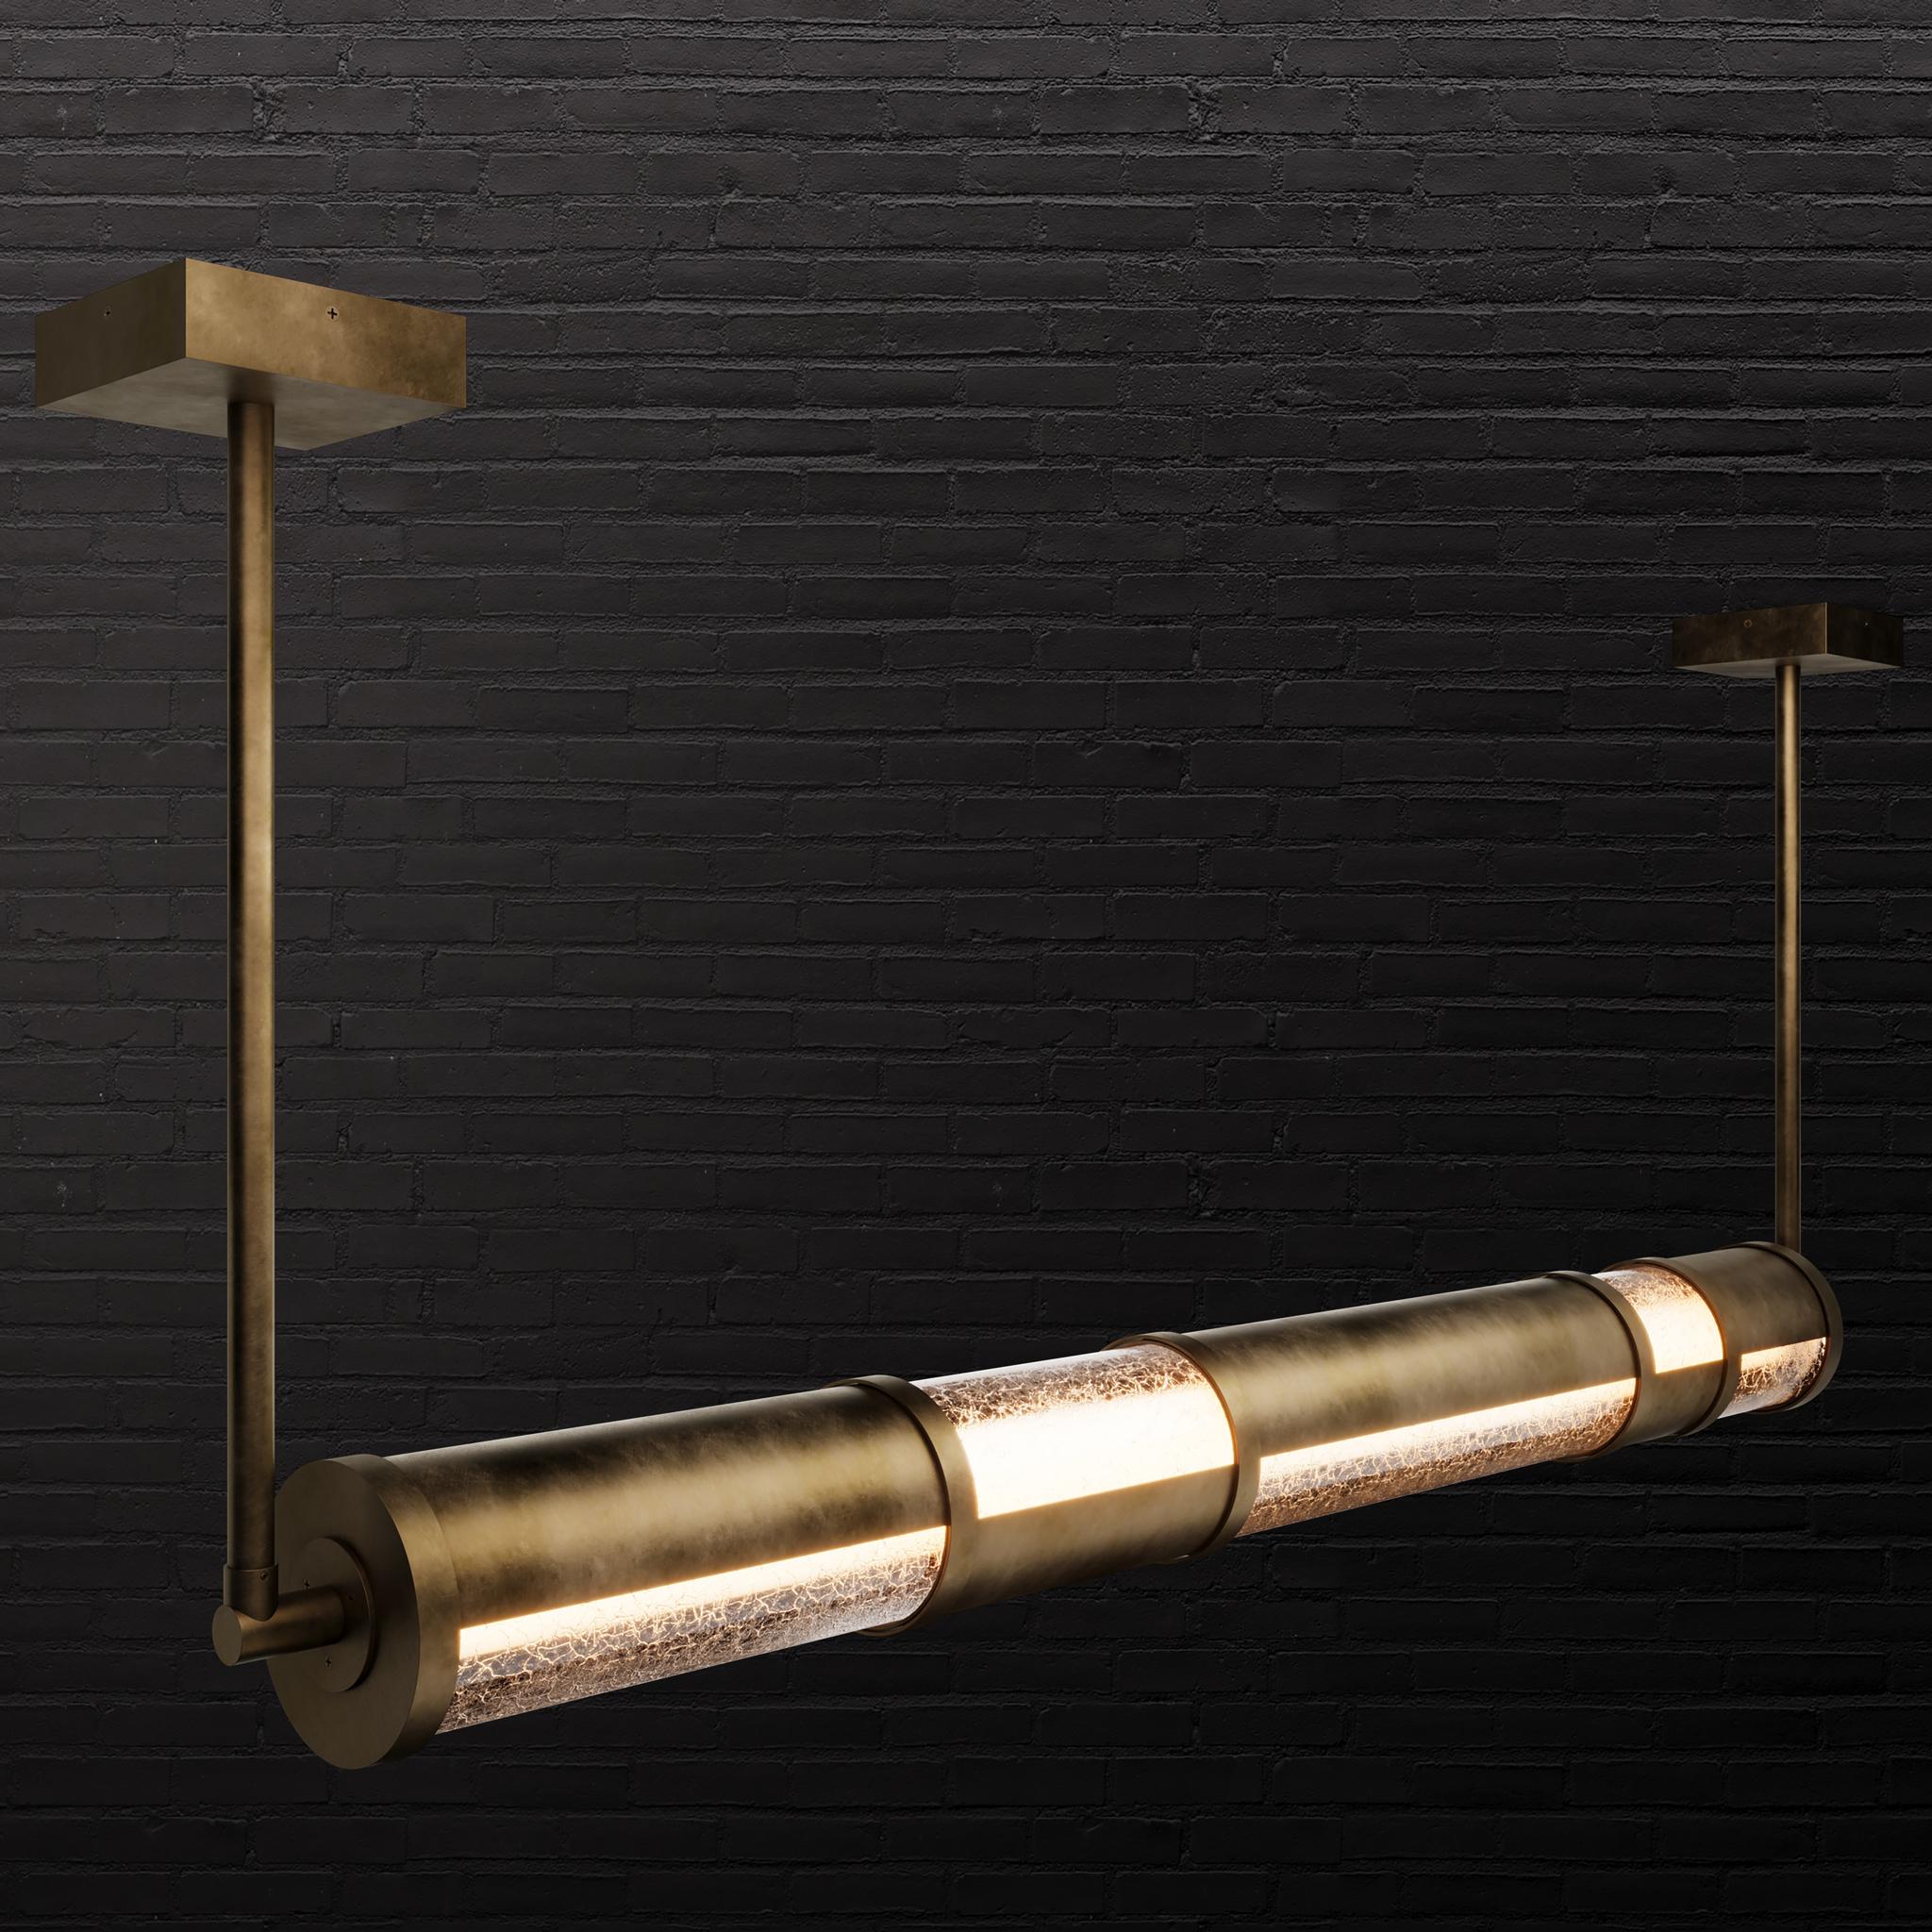 A Mondrian-inspired composition of glowing cristale crackle glass and warm antique brass creates an architectural column as a or torchiere. Custom Sizes Available.

Models in the collection are individually hand-crafted by the skilled artisans in